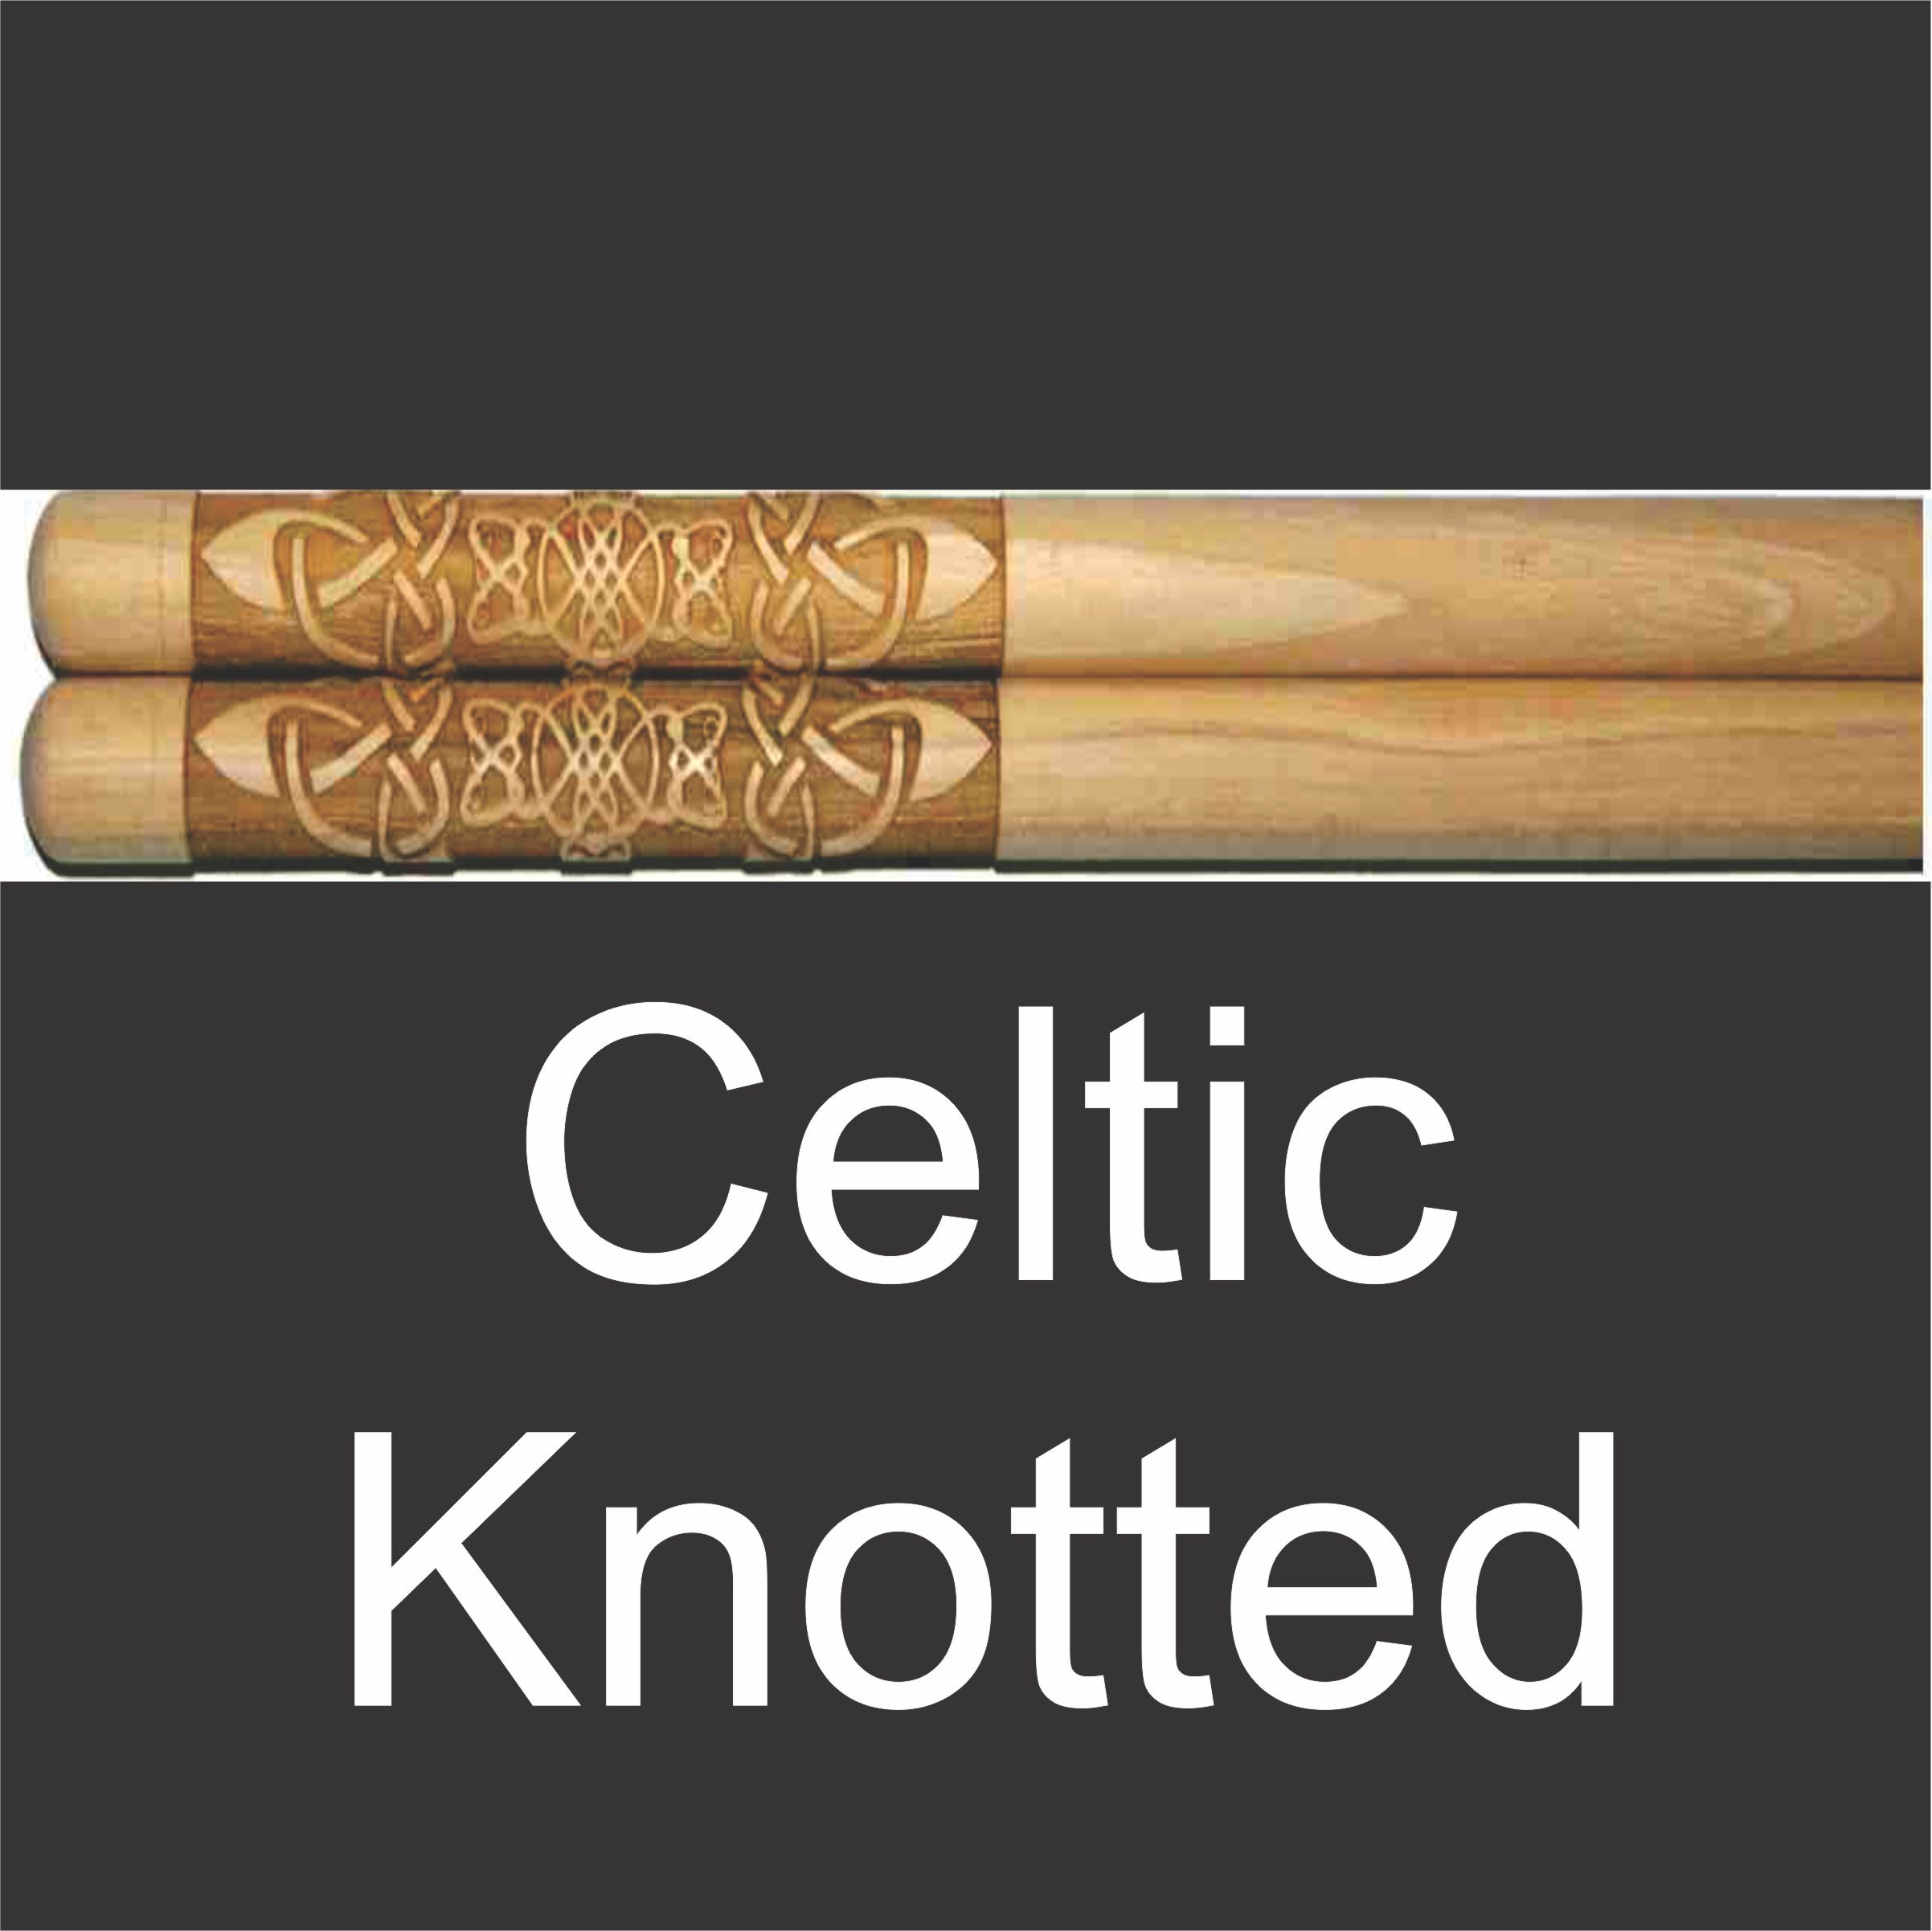 predesigned custom drumsticks with wrapping celtic knot design